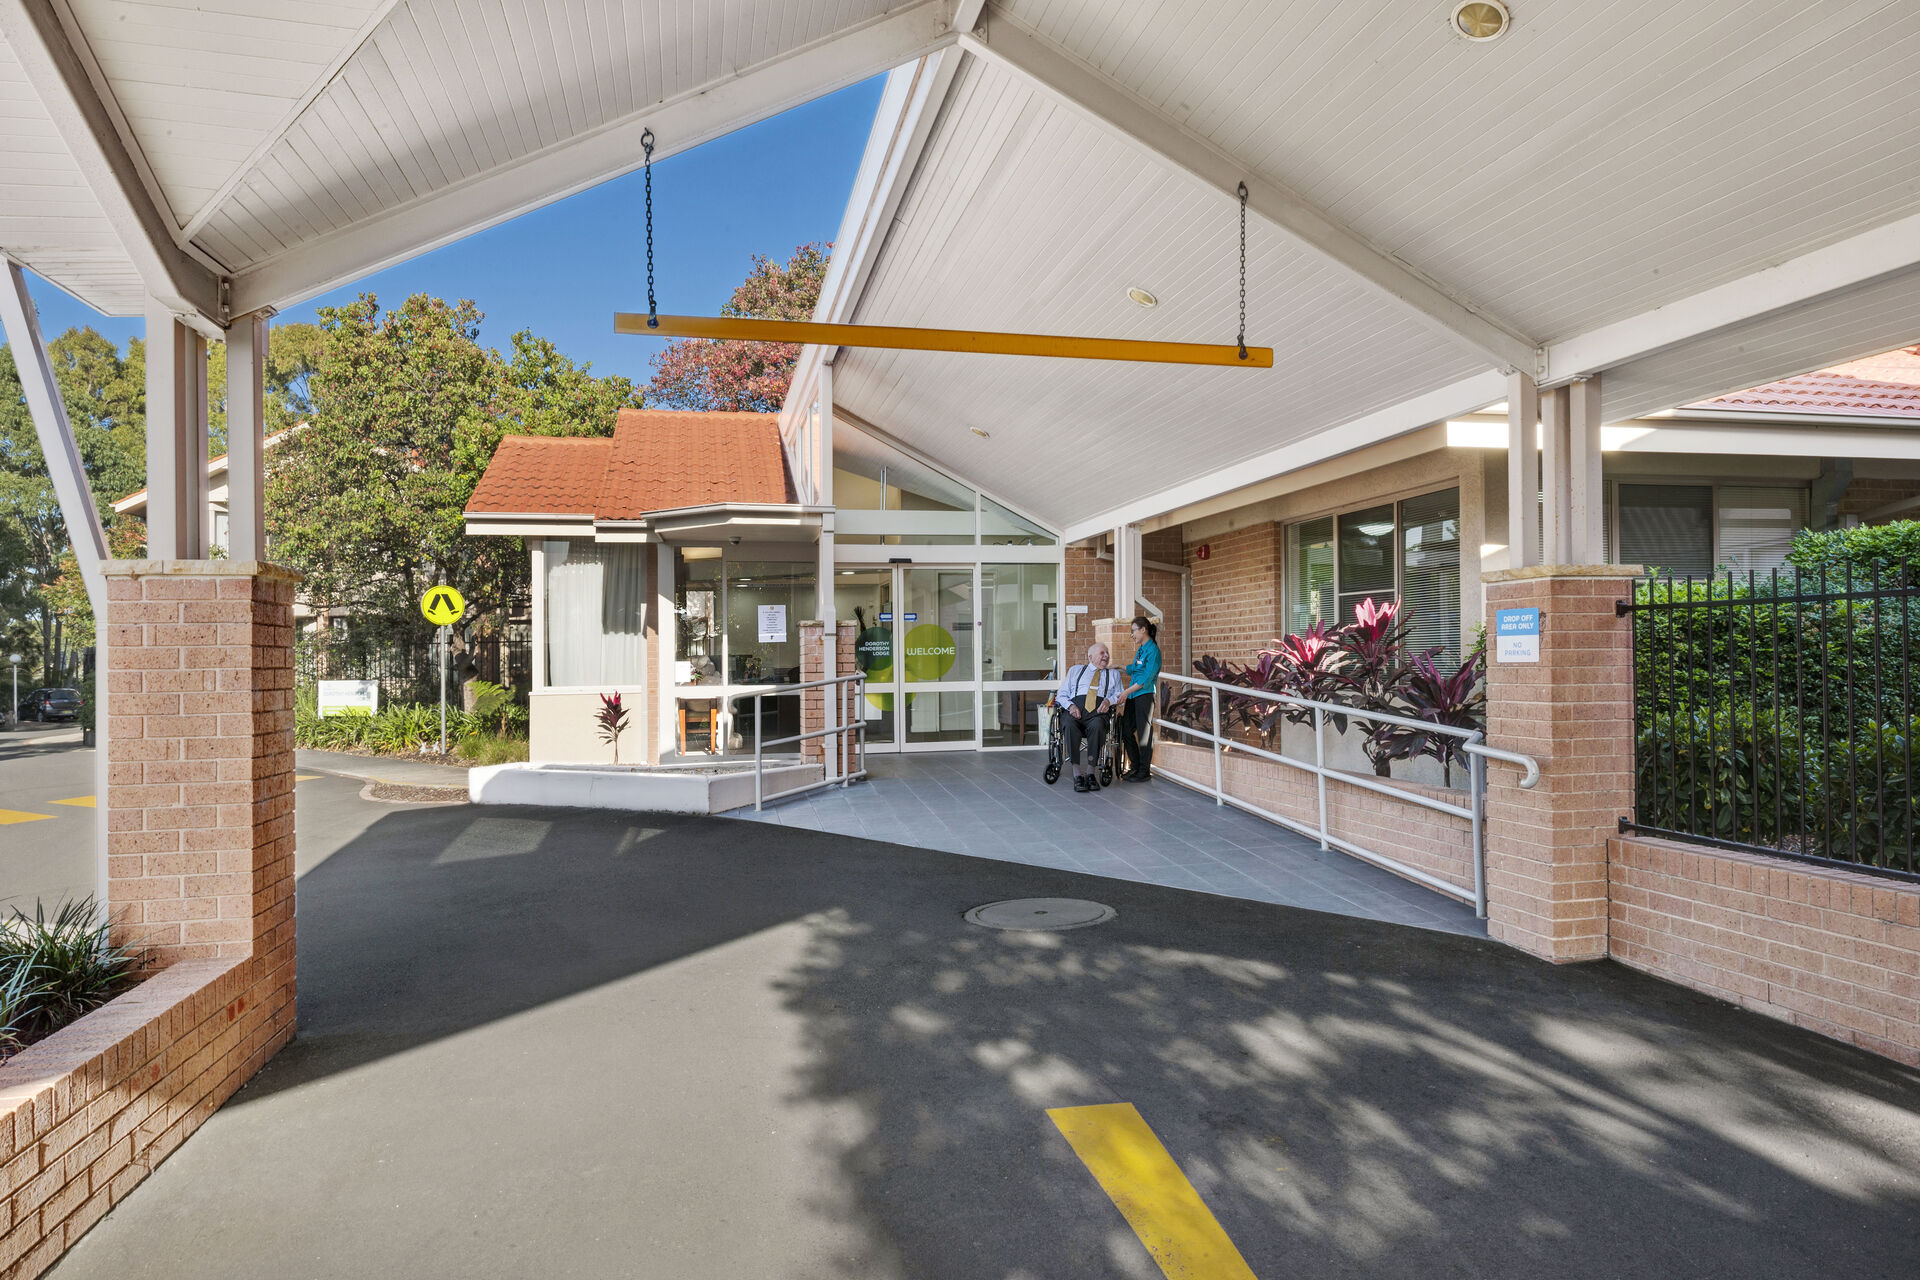 the entry driveway of dorothy henderson lodge aged care home in macquarie park nsw northern sydney